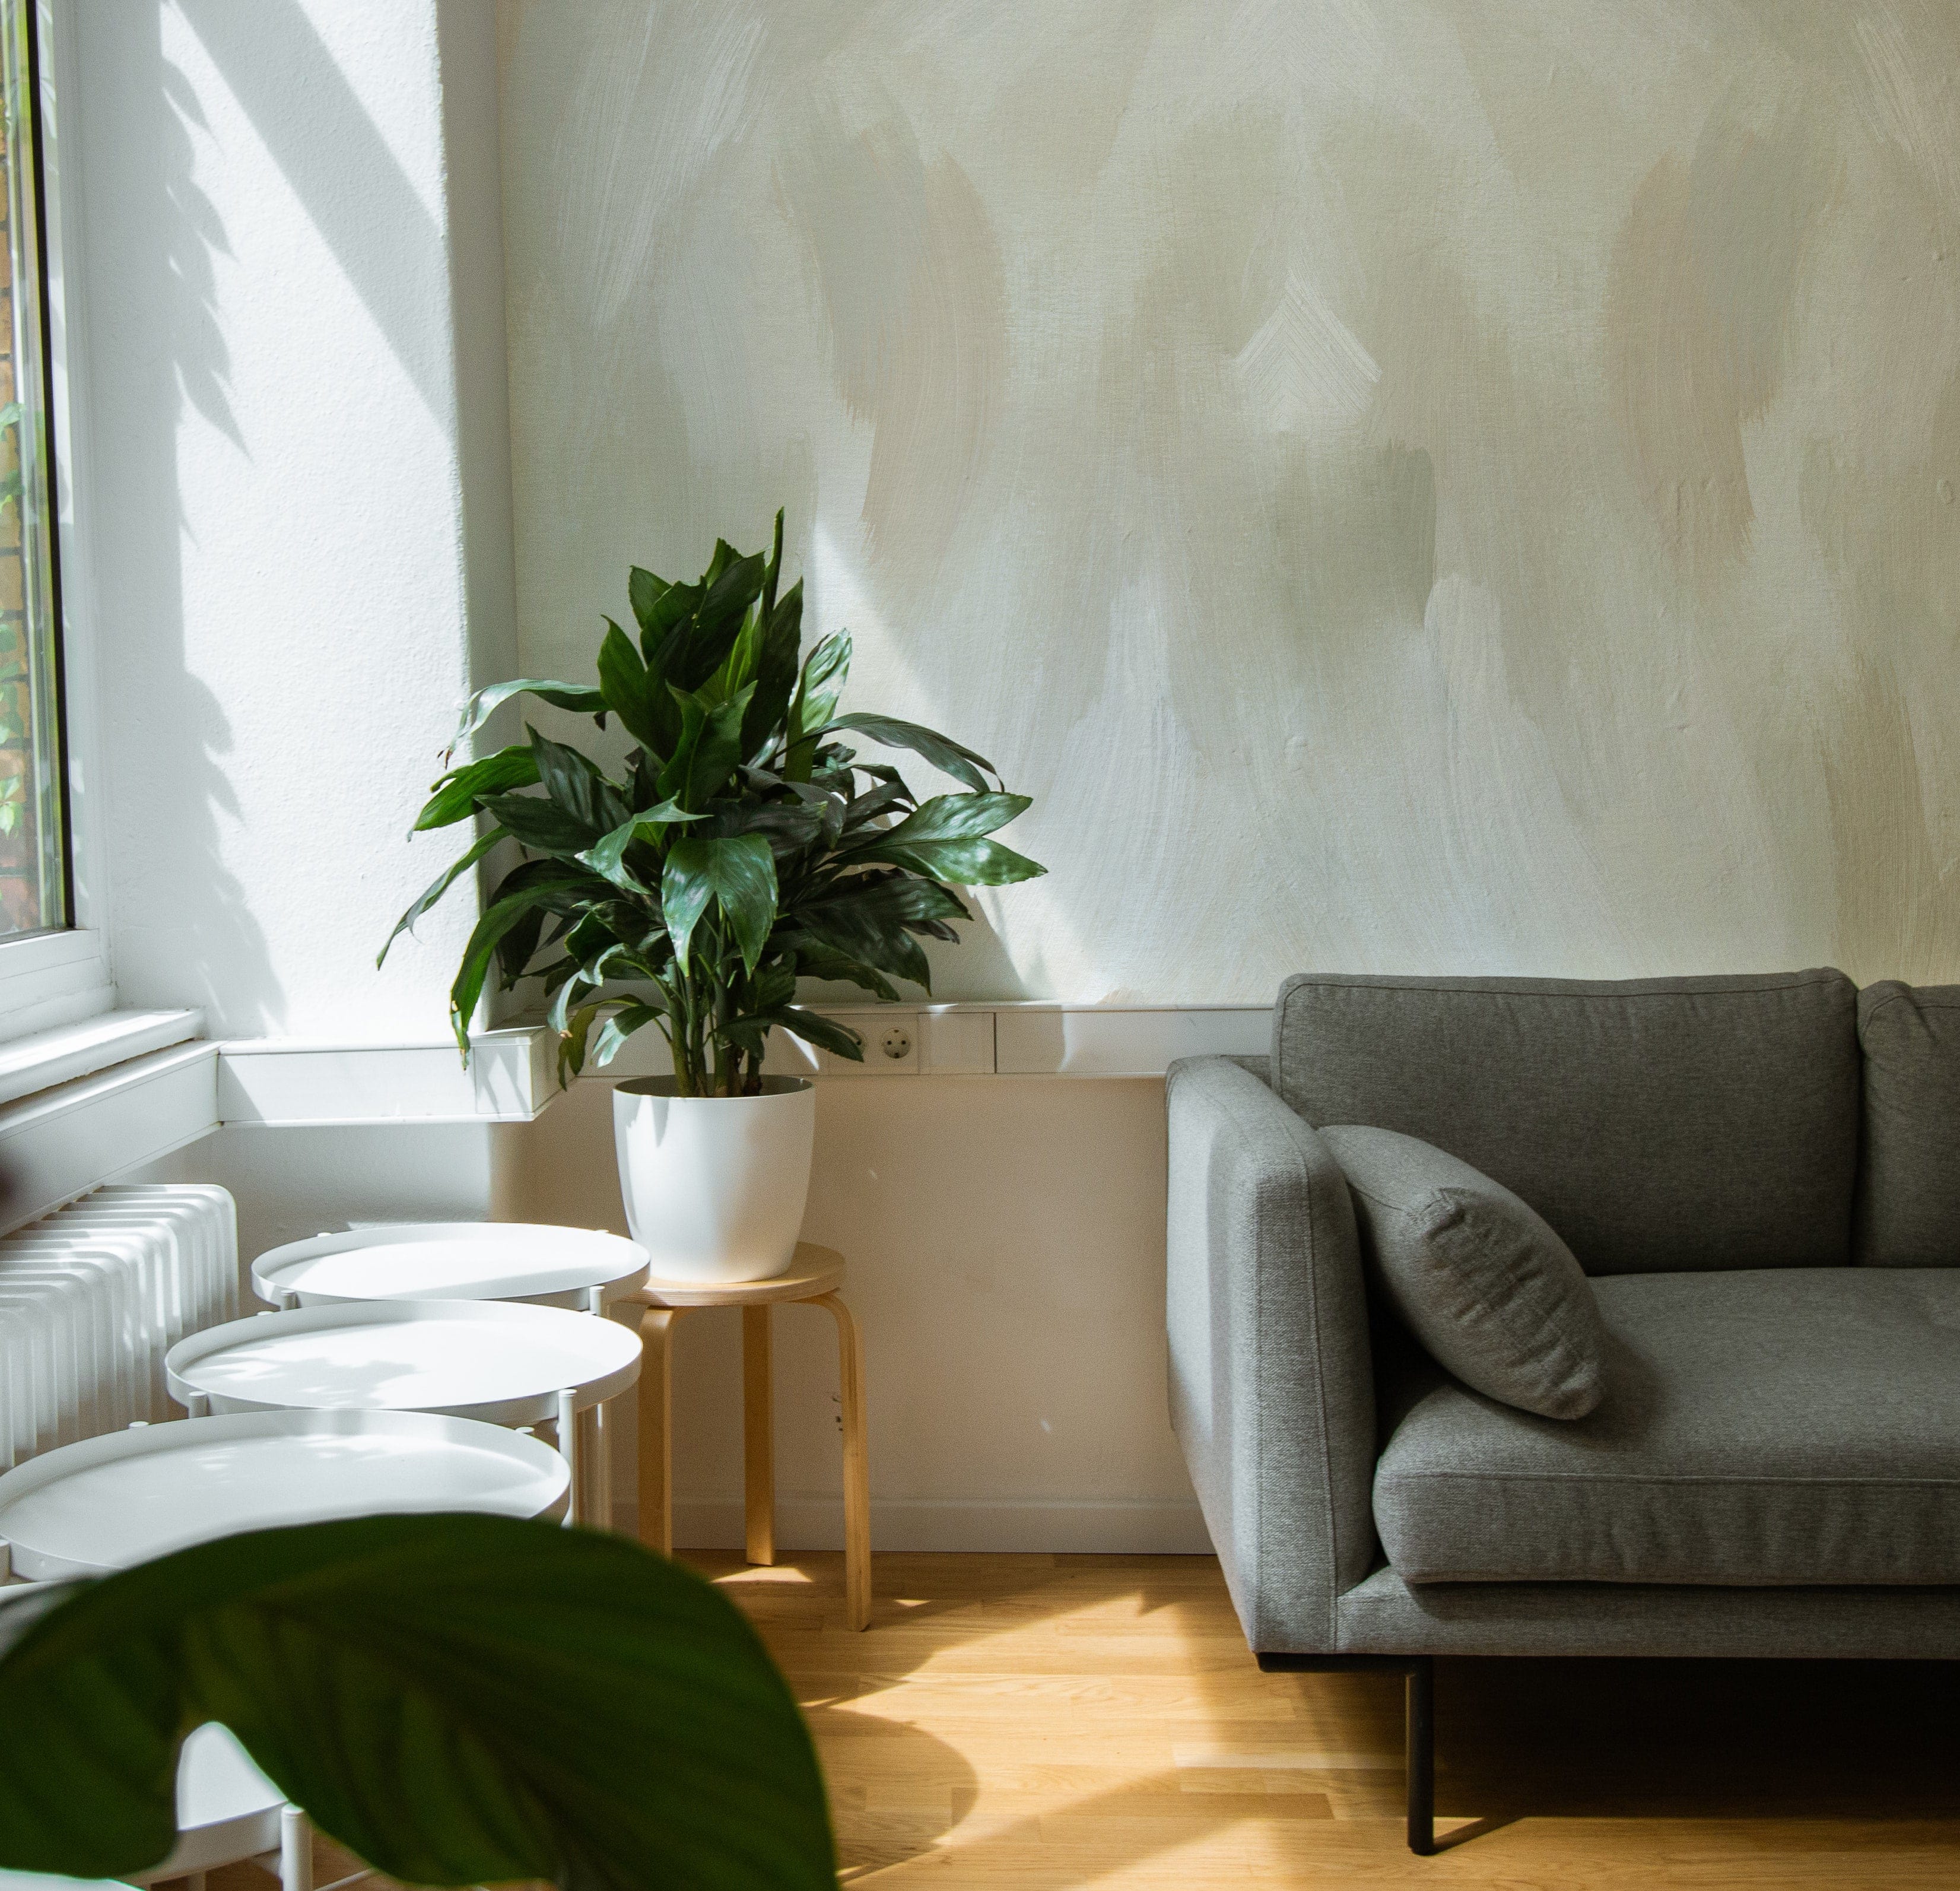 Earthy Aura Paint Texture Mural Wallpaper in a modern living room with natural light, a gray sofa, a potted plant on a wooden stool, and minimalist white side tables.